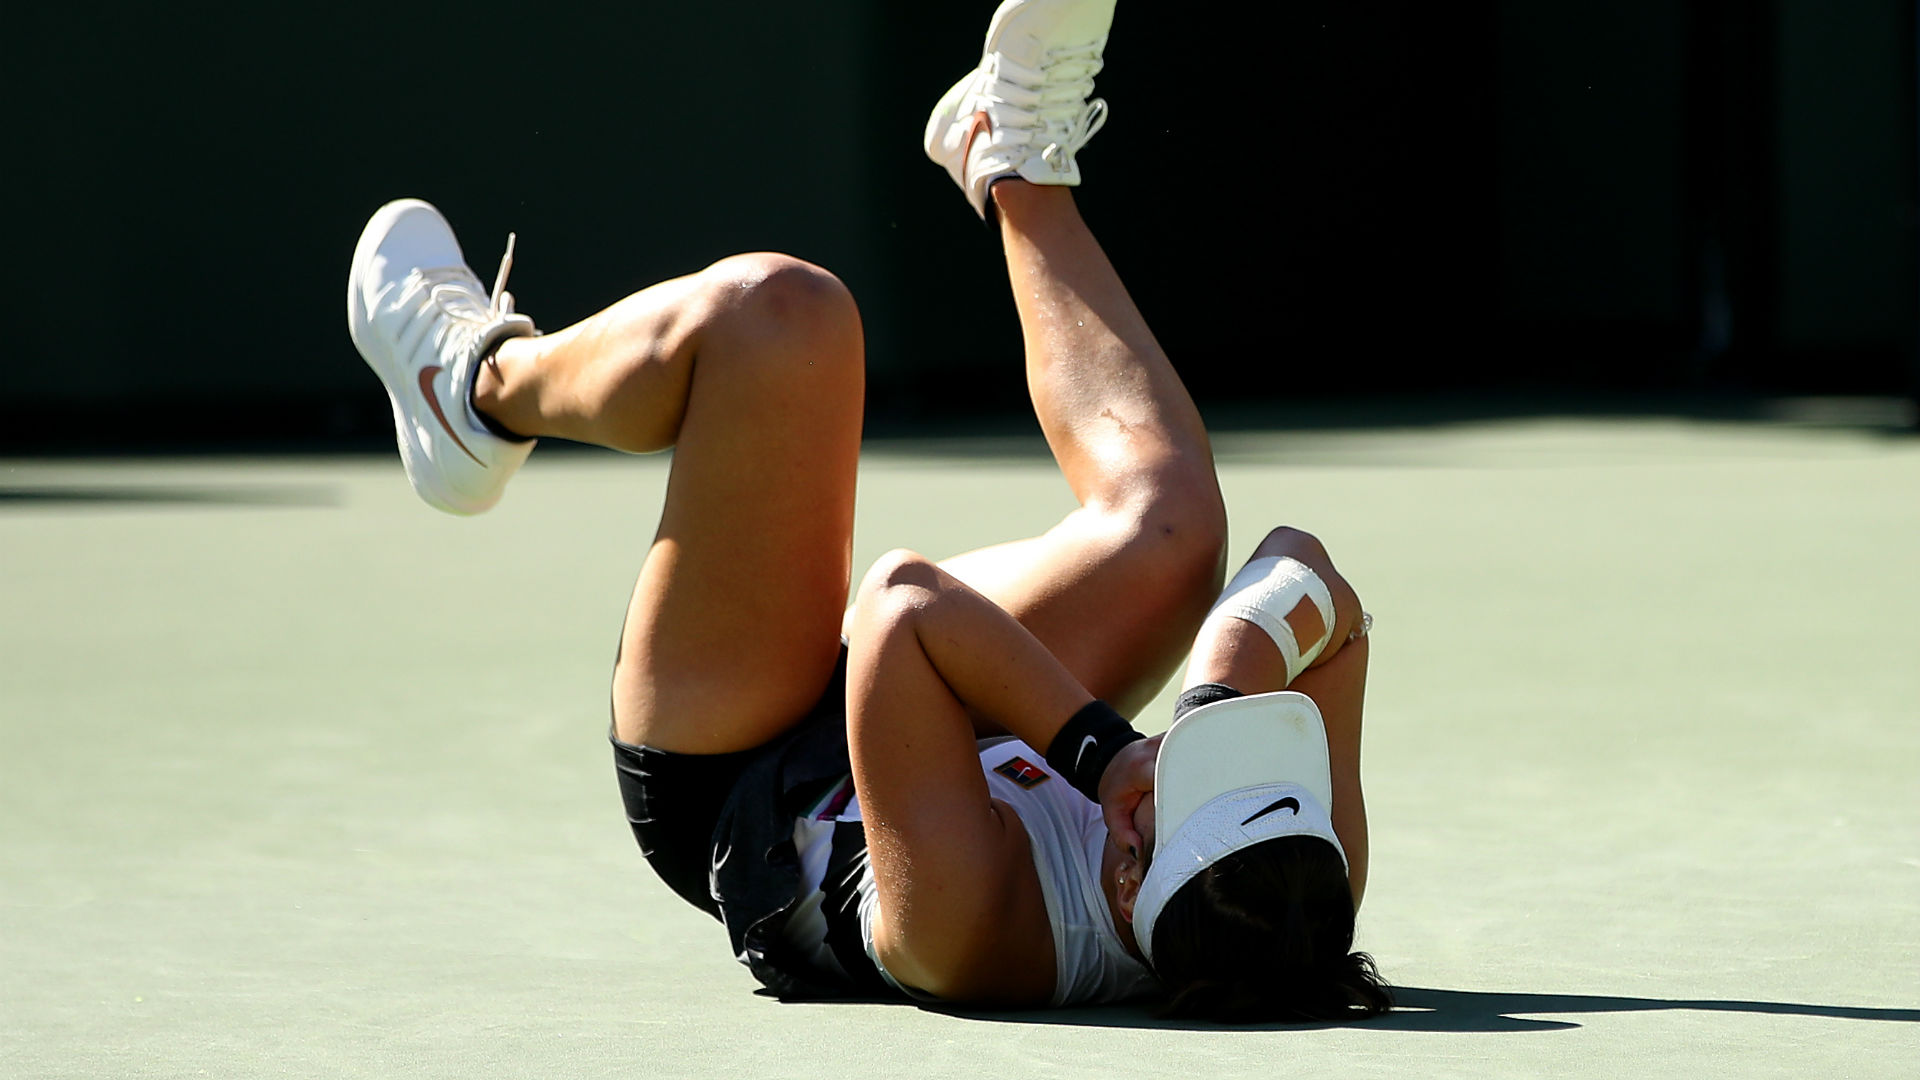 Bianca Andreescu was in disbelief after defeating Angelique Kerber at Indian Wells, securing the teenager her first WTA Tour title.